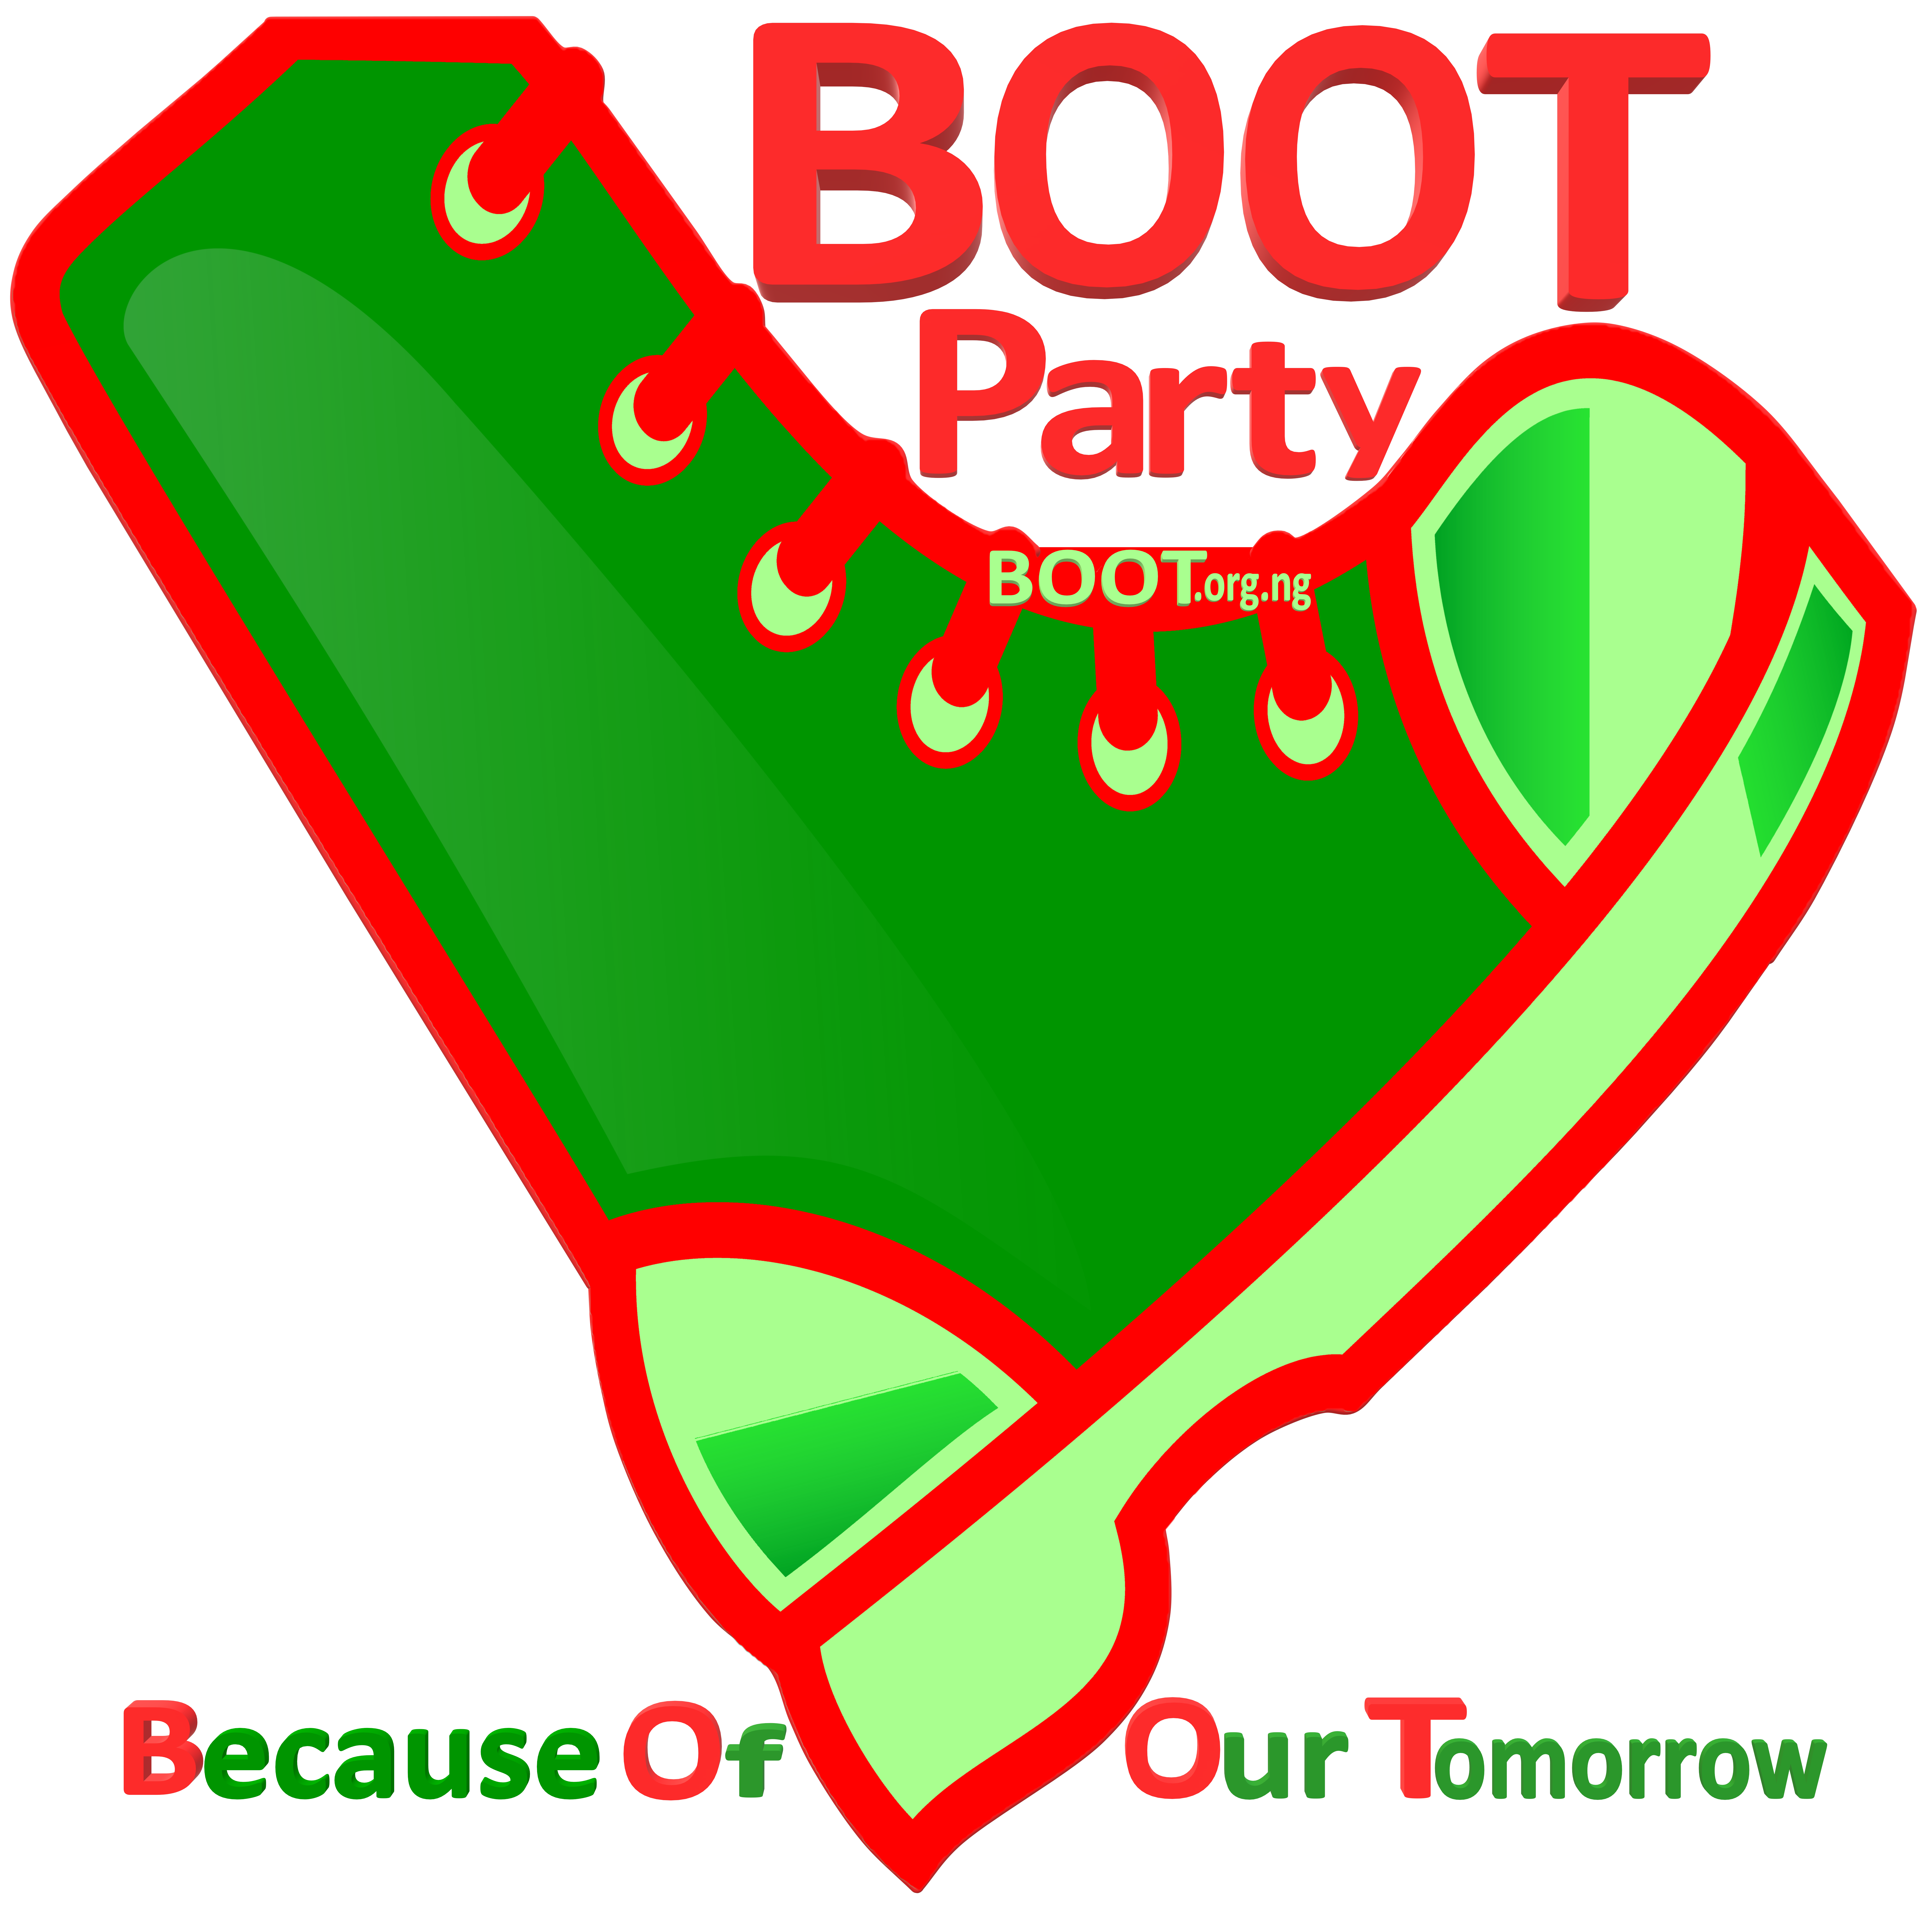 BOOT Party